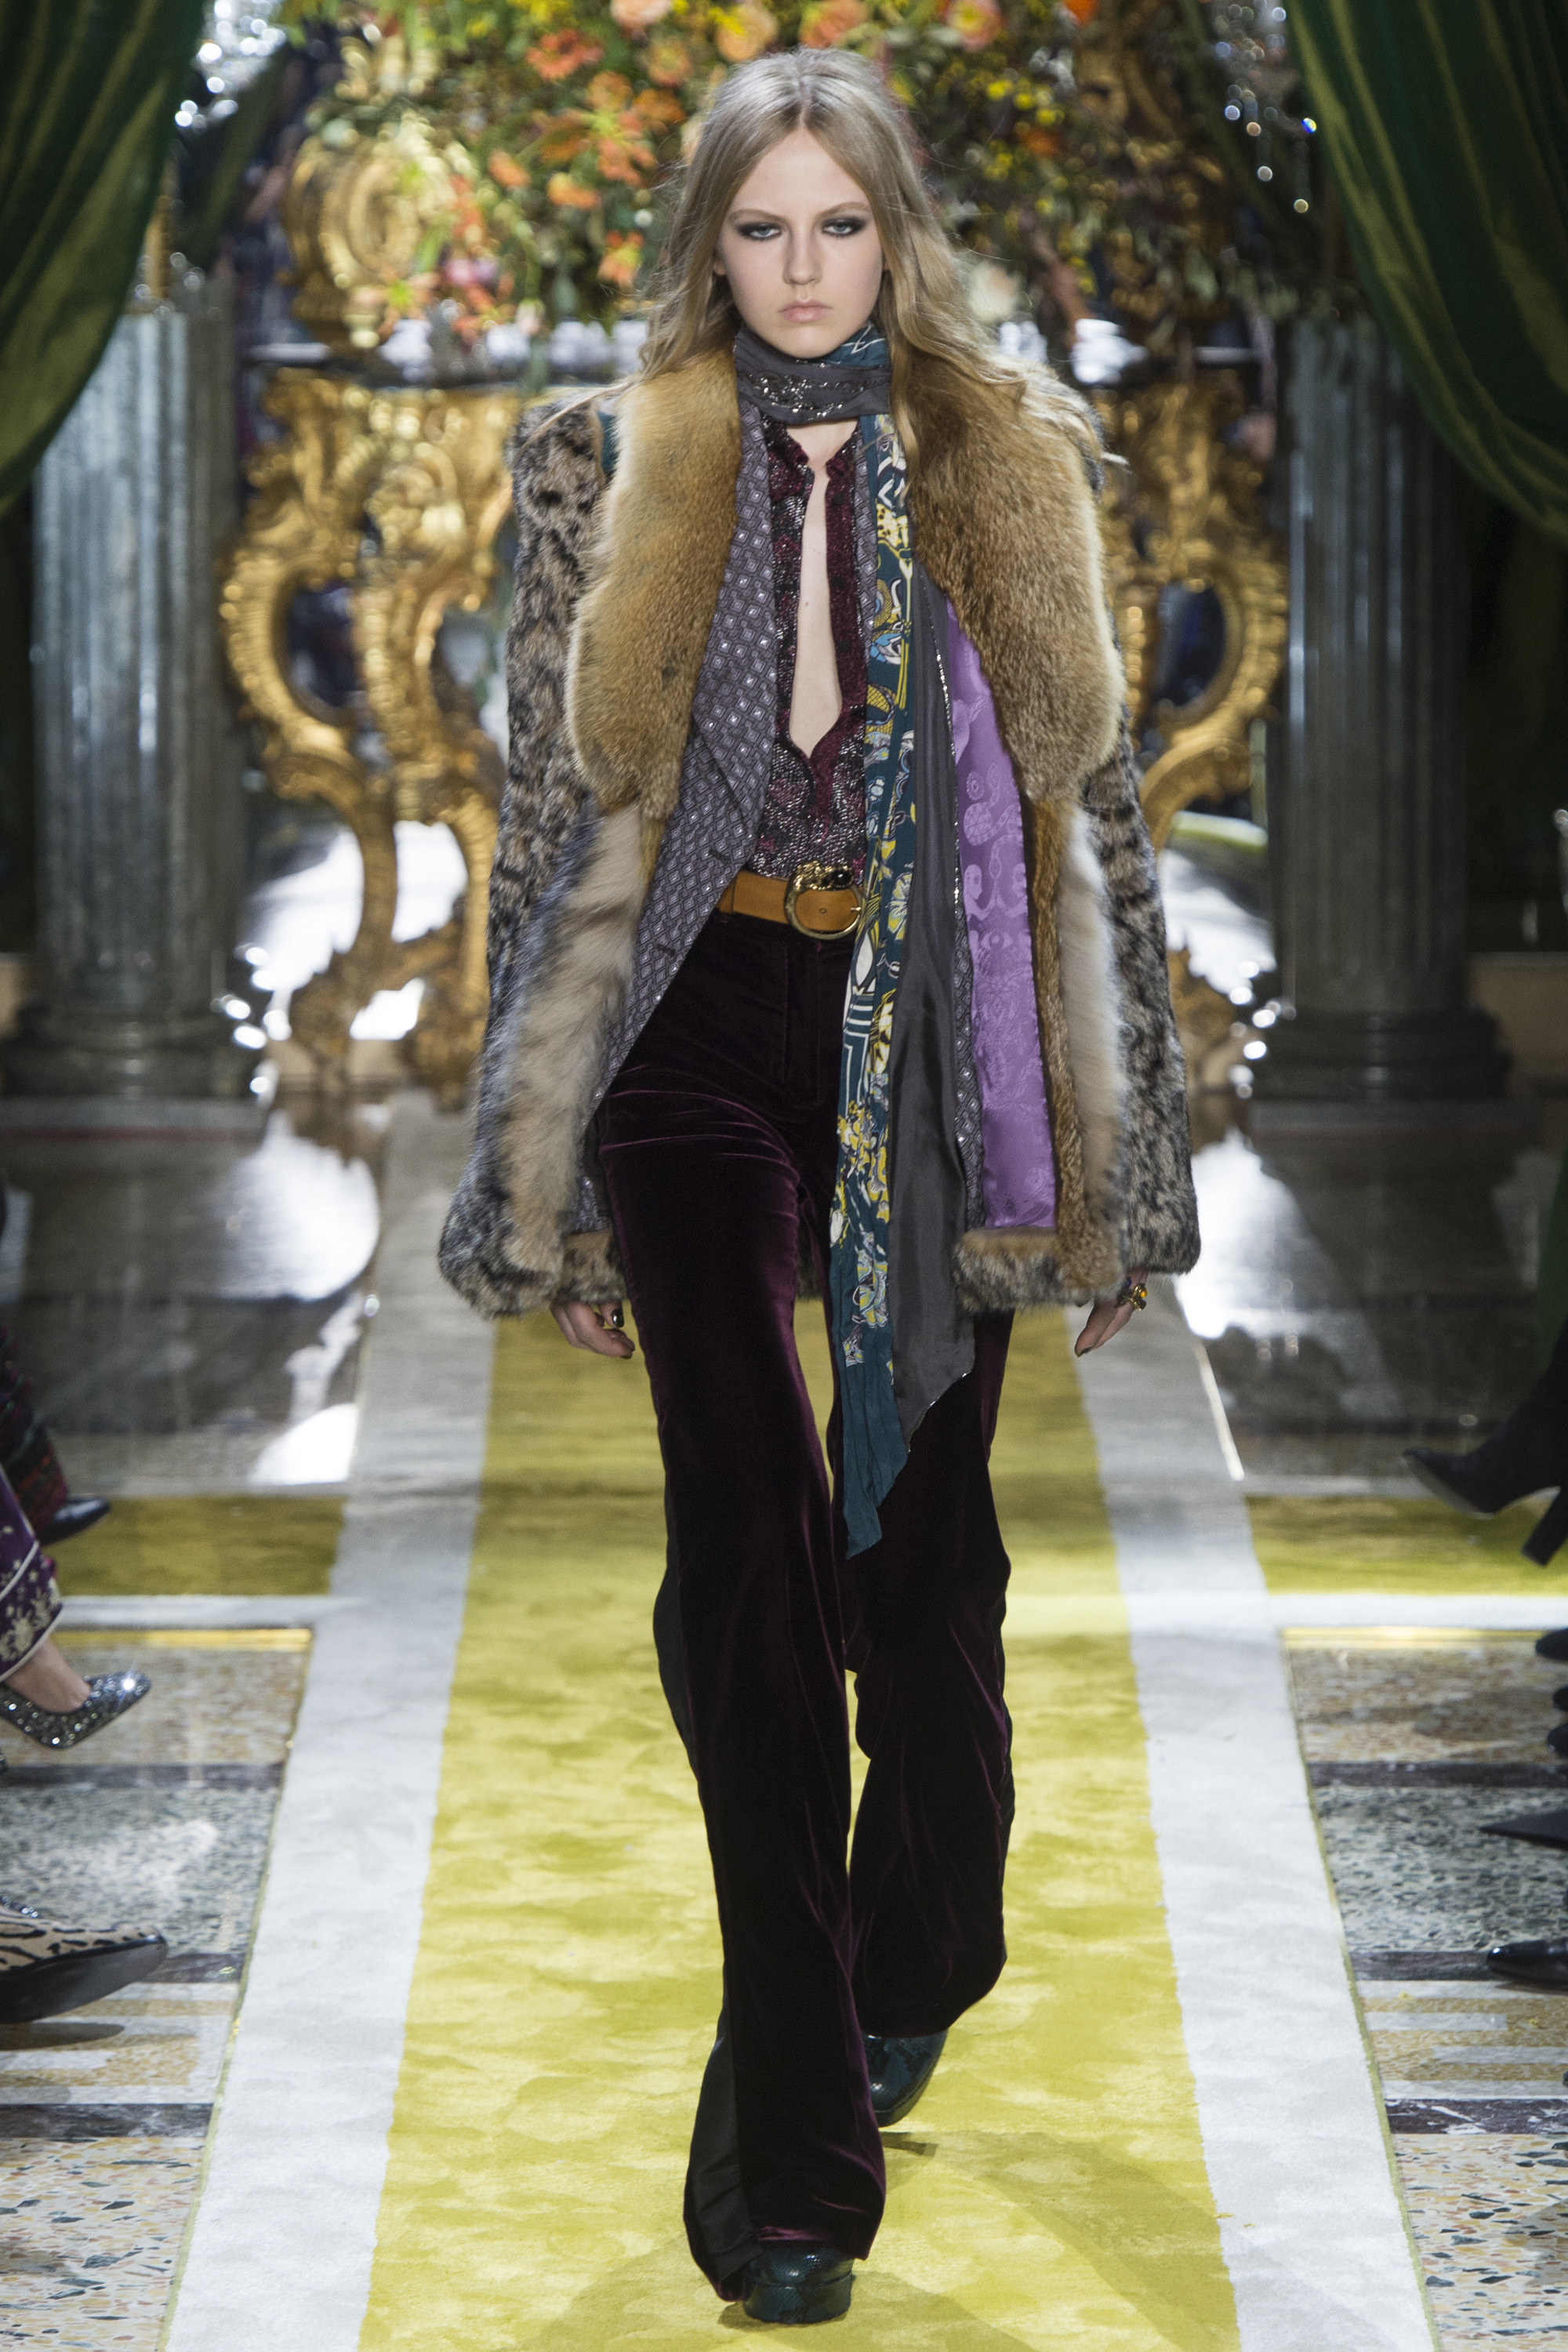 Roberto Cavalli Fall 2016 RTW Collection had a Seventies Glam Rock Vibe